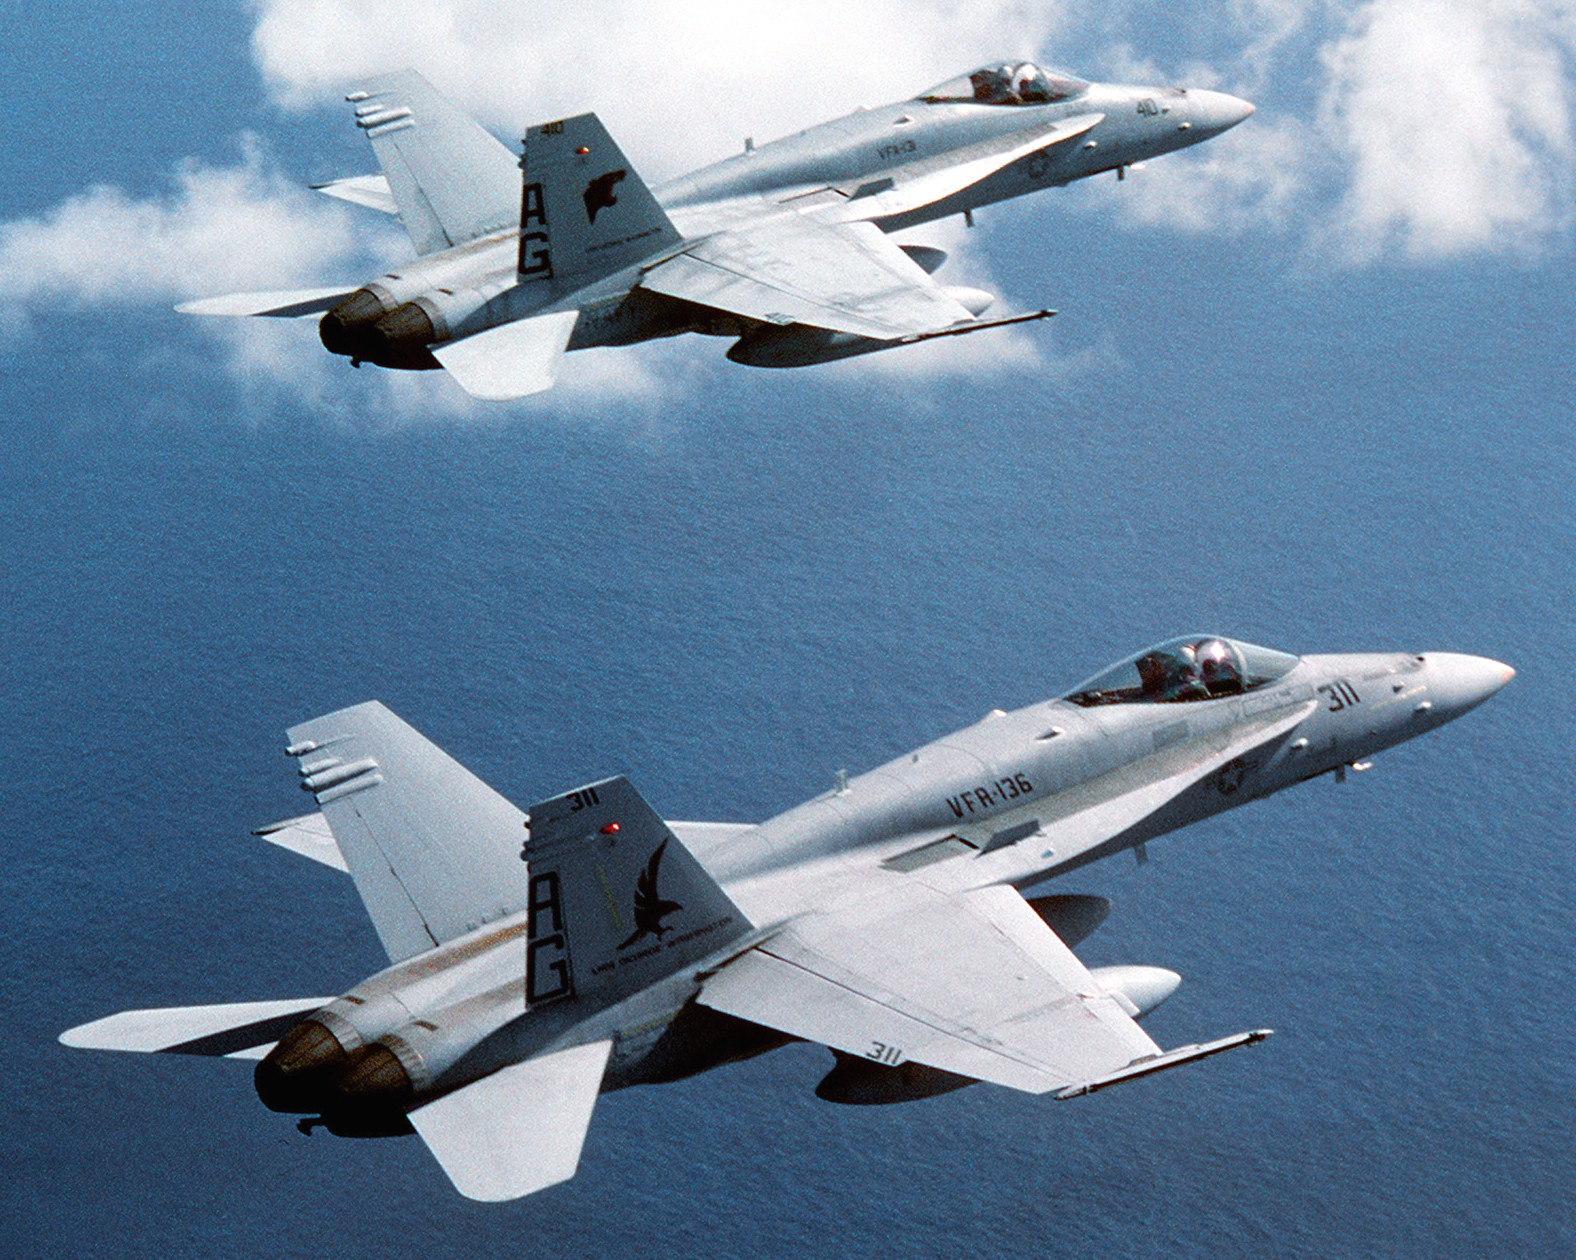 vfa-136 knighthawks strike fighter squadron f/a-18c hornet 1992 108 cvw-7 naval station roosevelt roads puerto rico